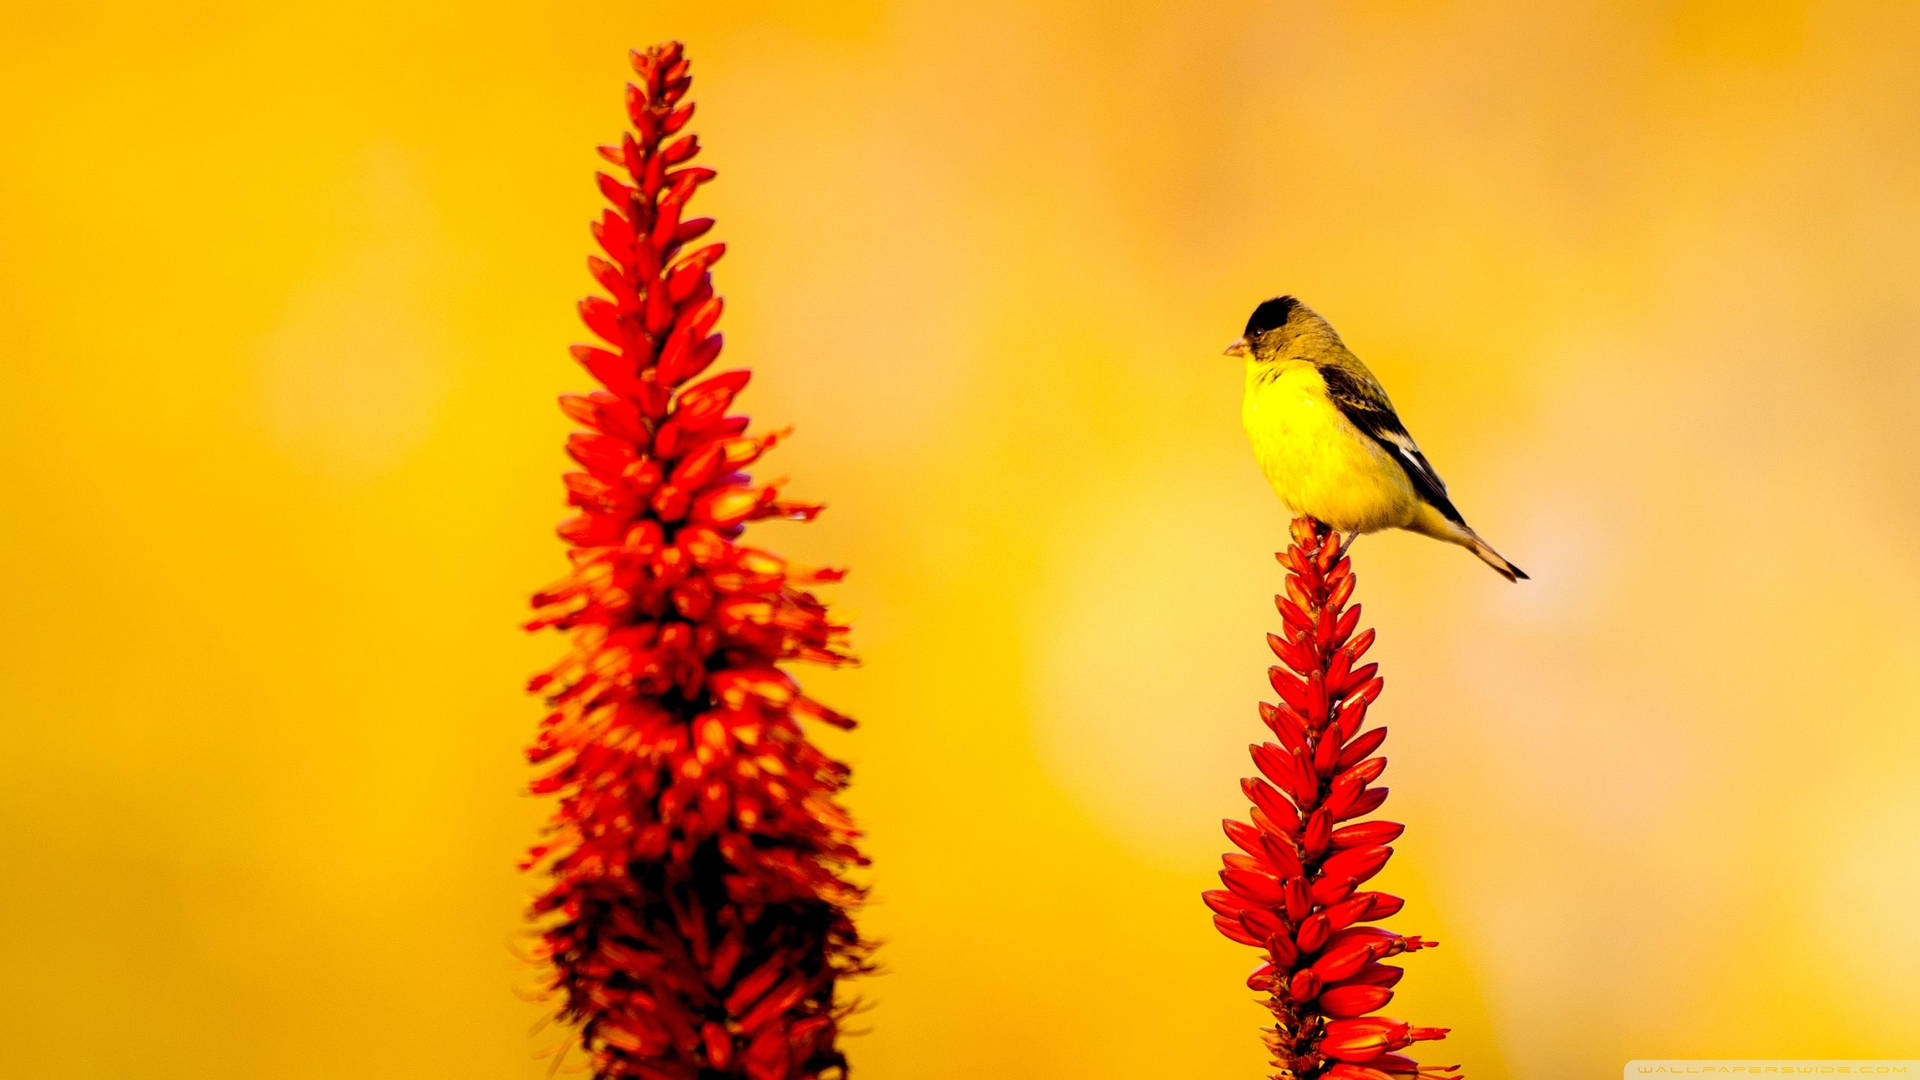 Yellow Bird On Red Flowers Background